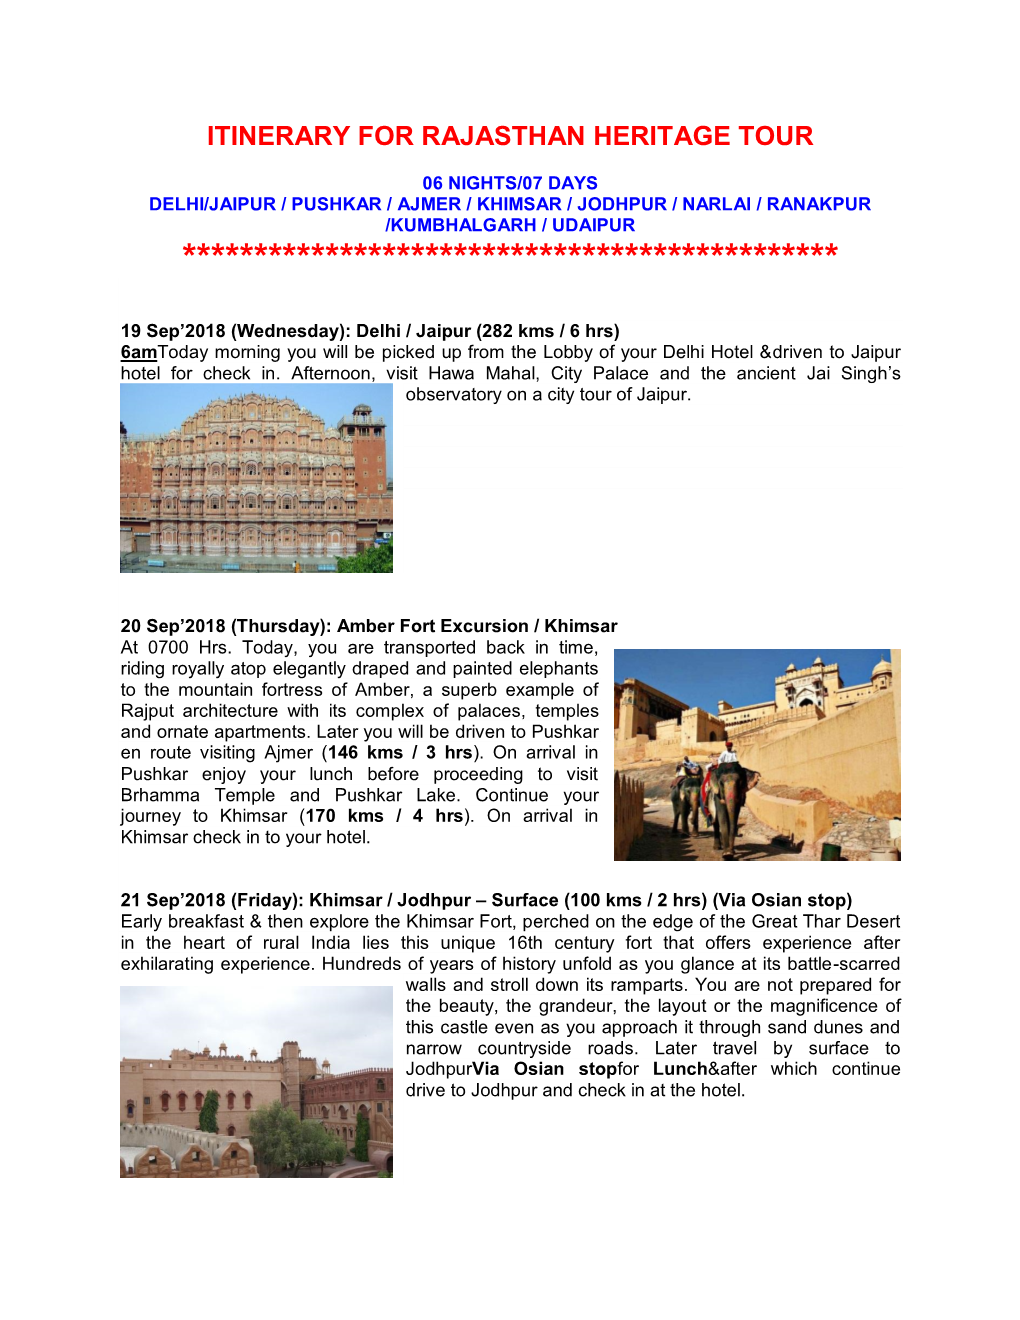 Itinerary for Rajasthan Heritage Tour